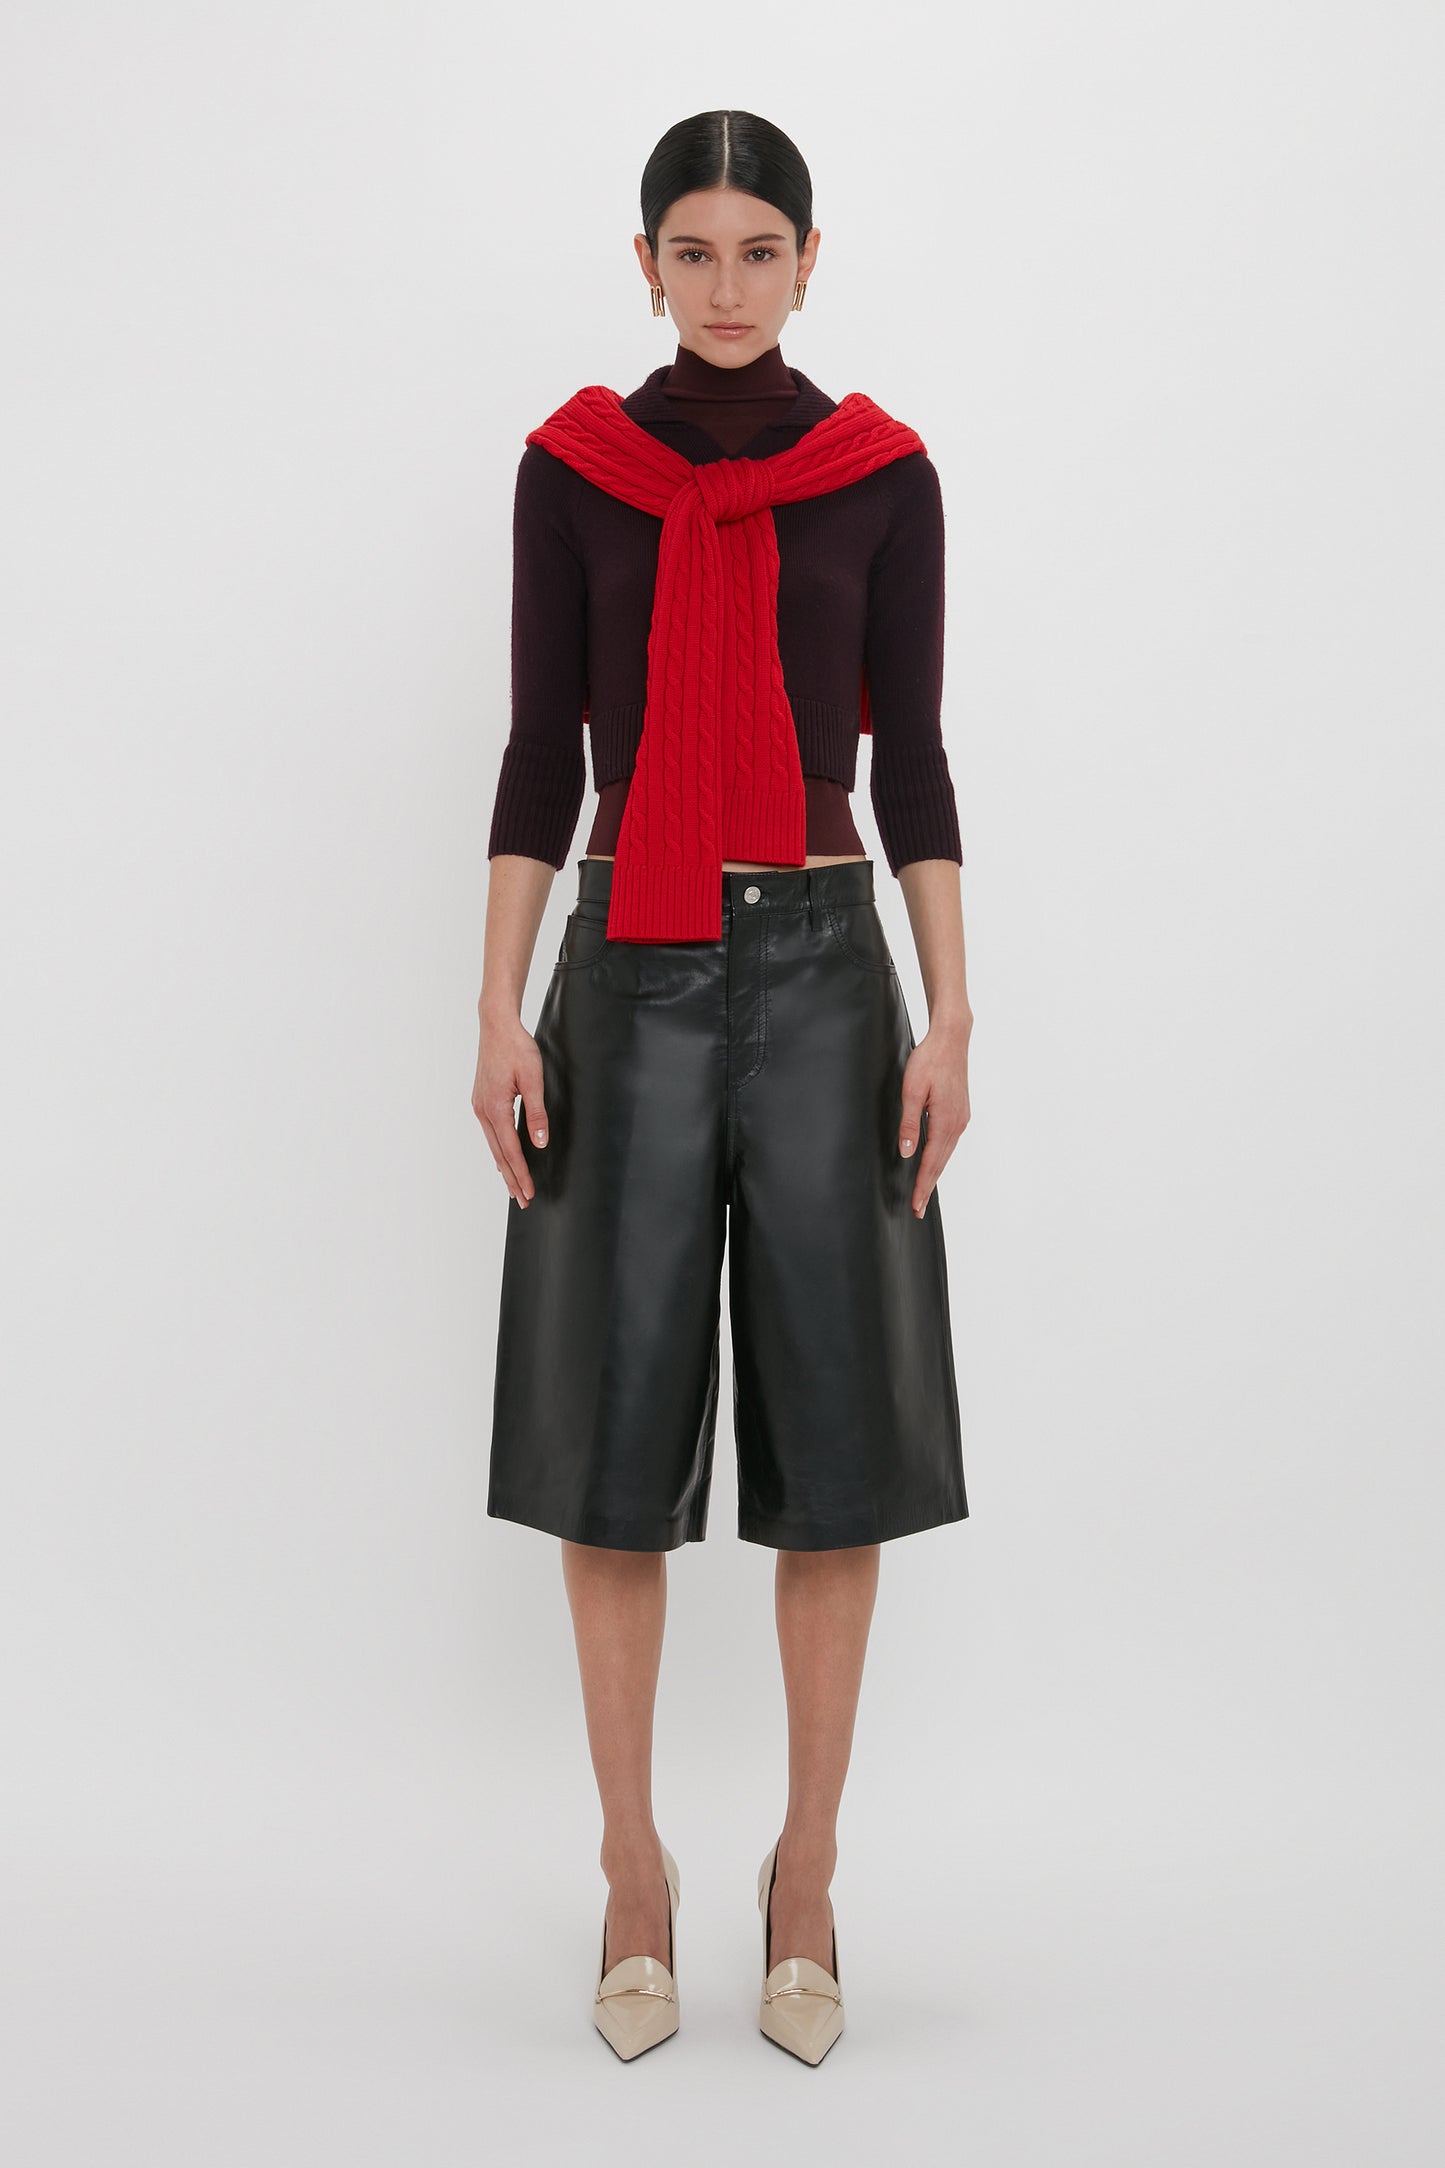 A person stands against a white background wearing a red sweater around their neck, a dark shirt, Victoria Beckham's Leather Bermuda Short In Black, and beige pointed shoes.